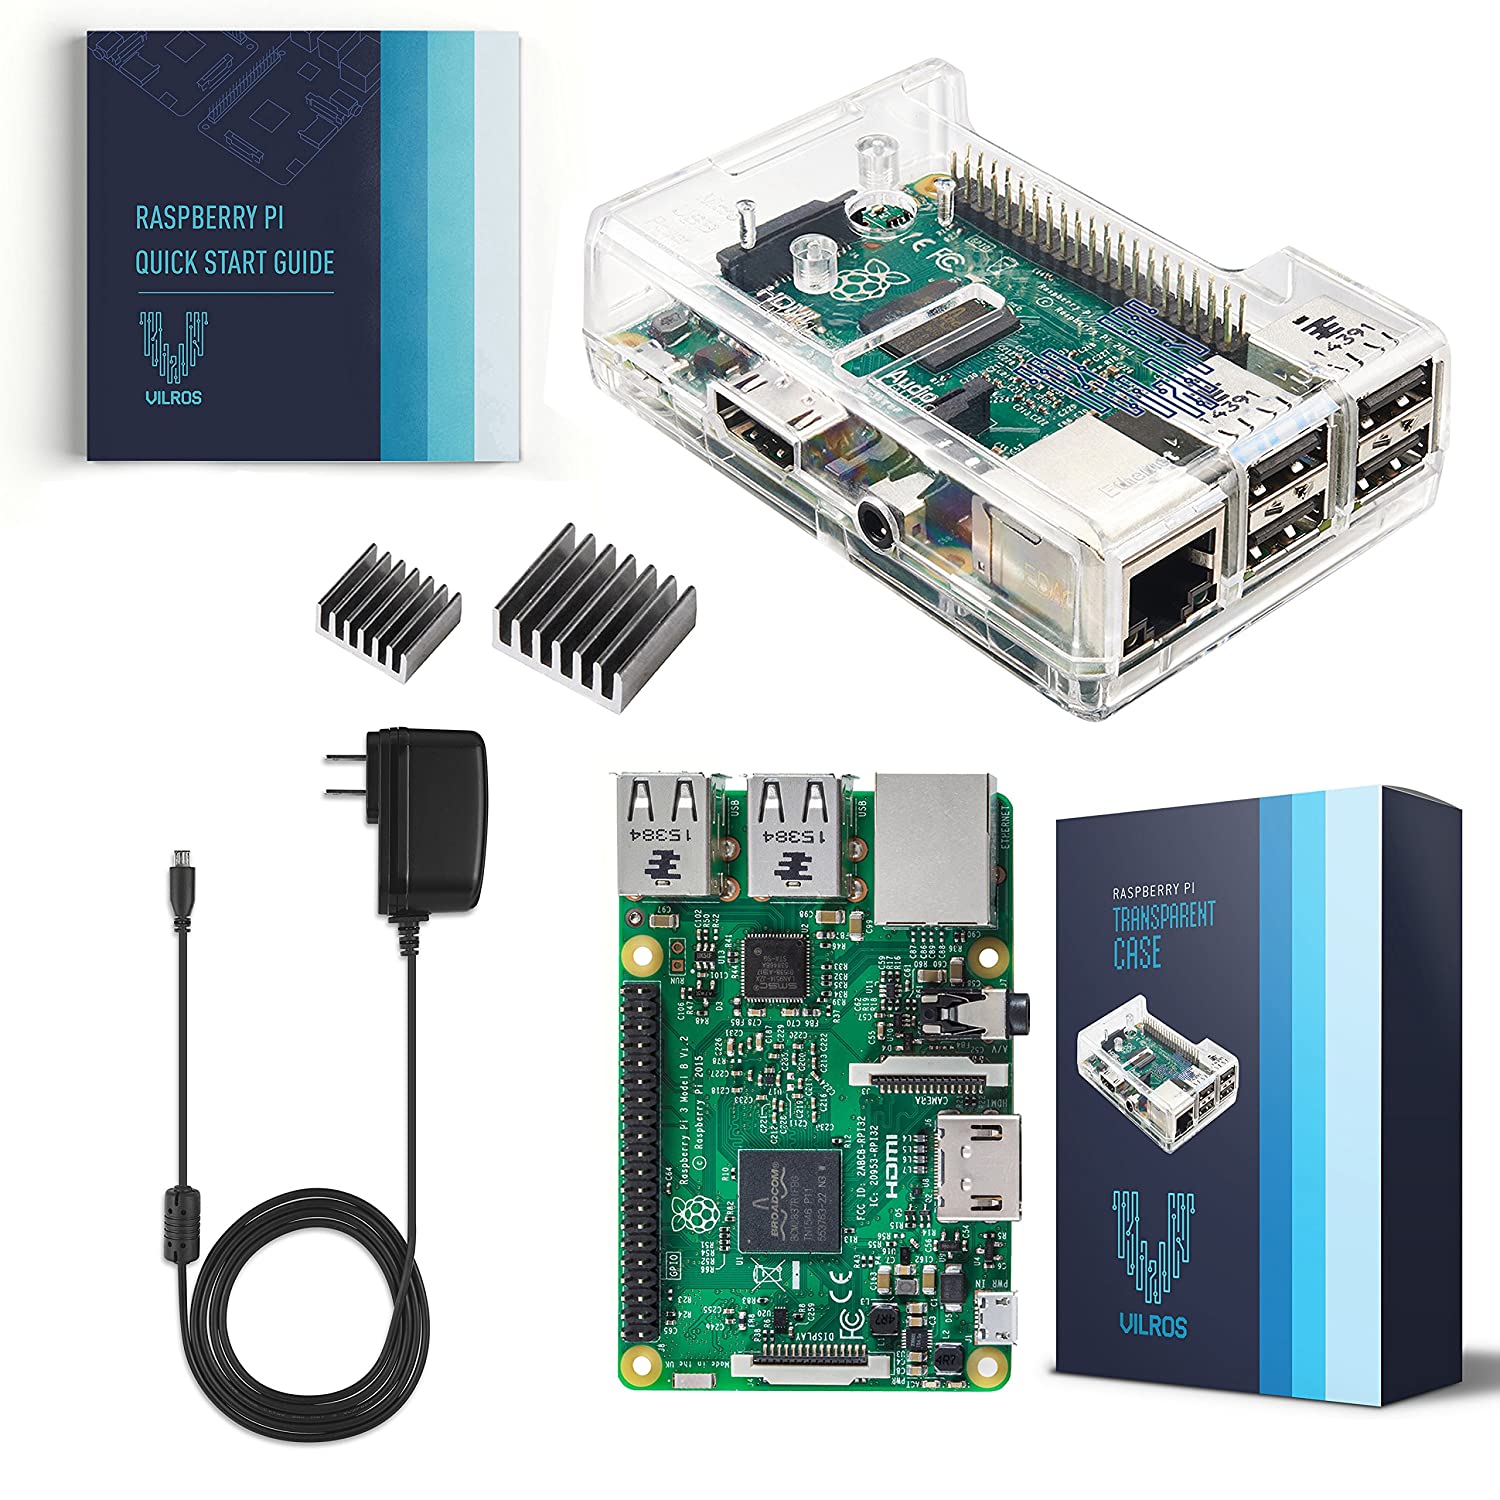 Vilros Raspberry Pi 3 Kit with Clear Case and 2.5A Power Supply